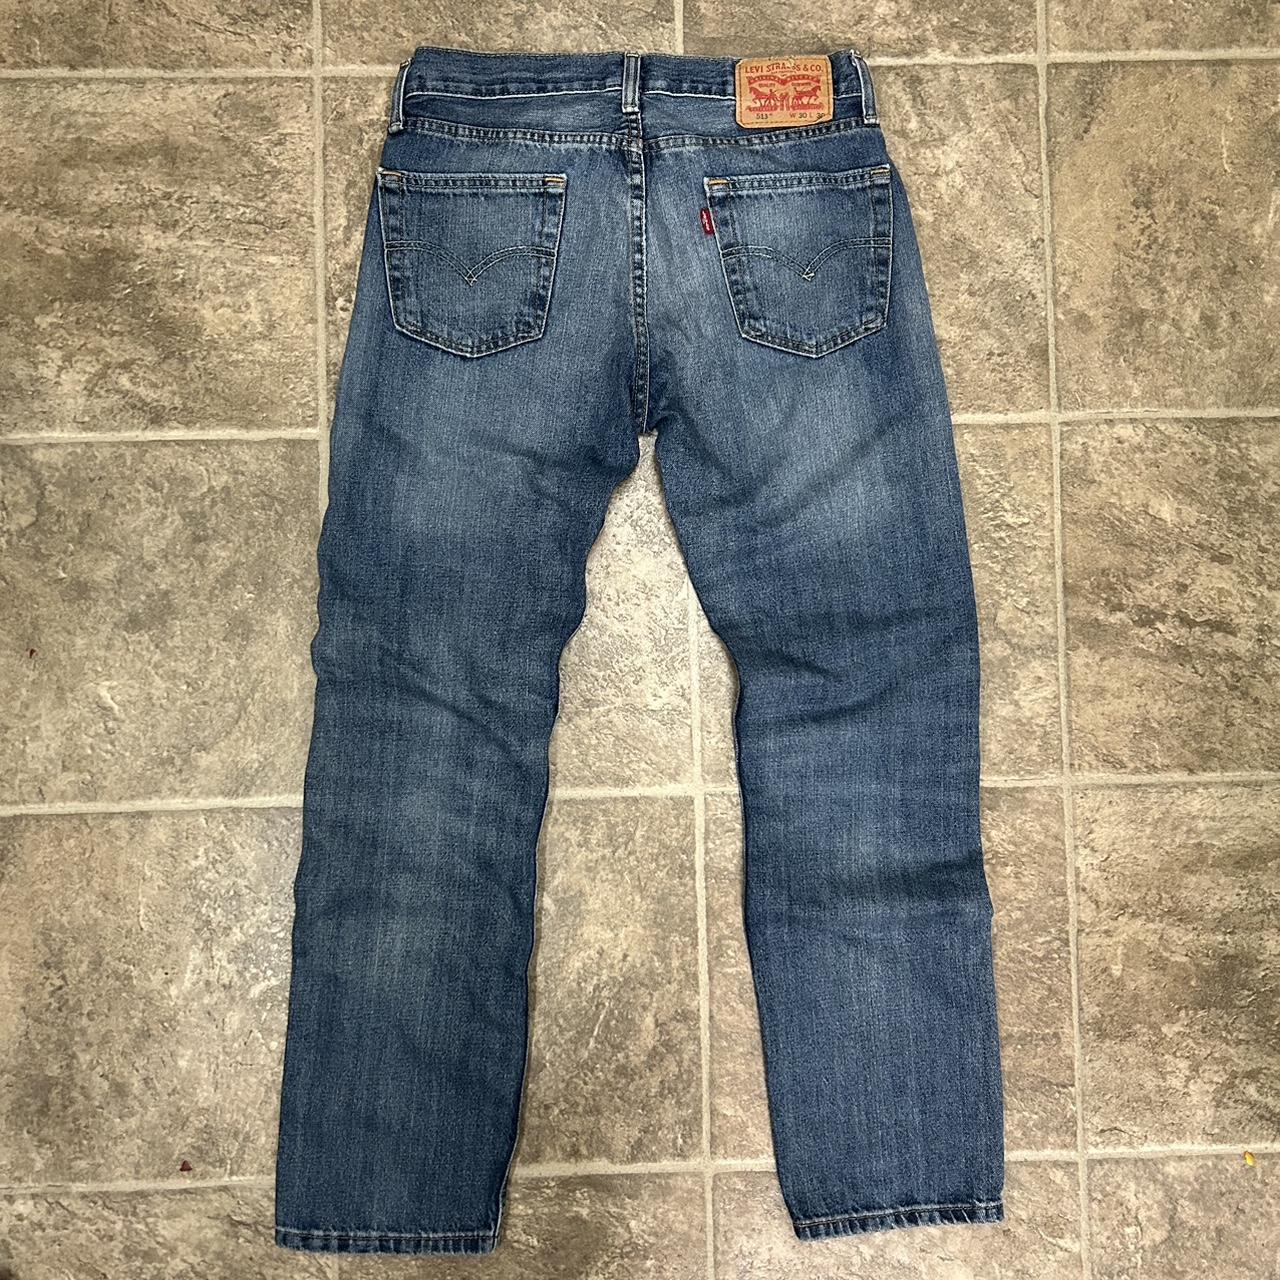 Levis 513 Jeans, Very Nice Looking Jeans! Size... - Depop